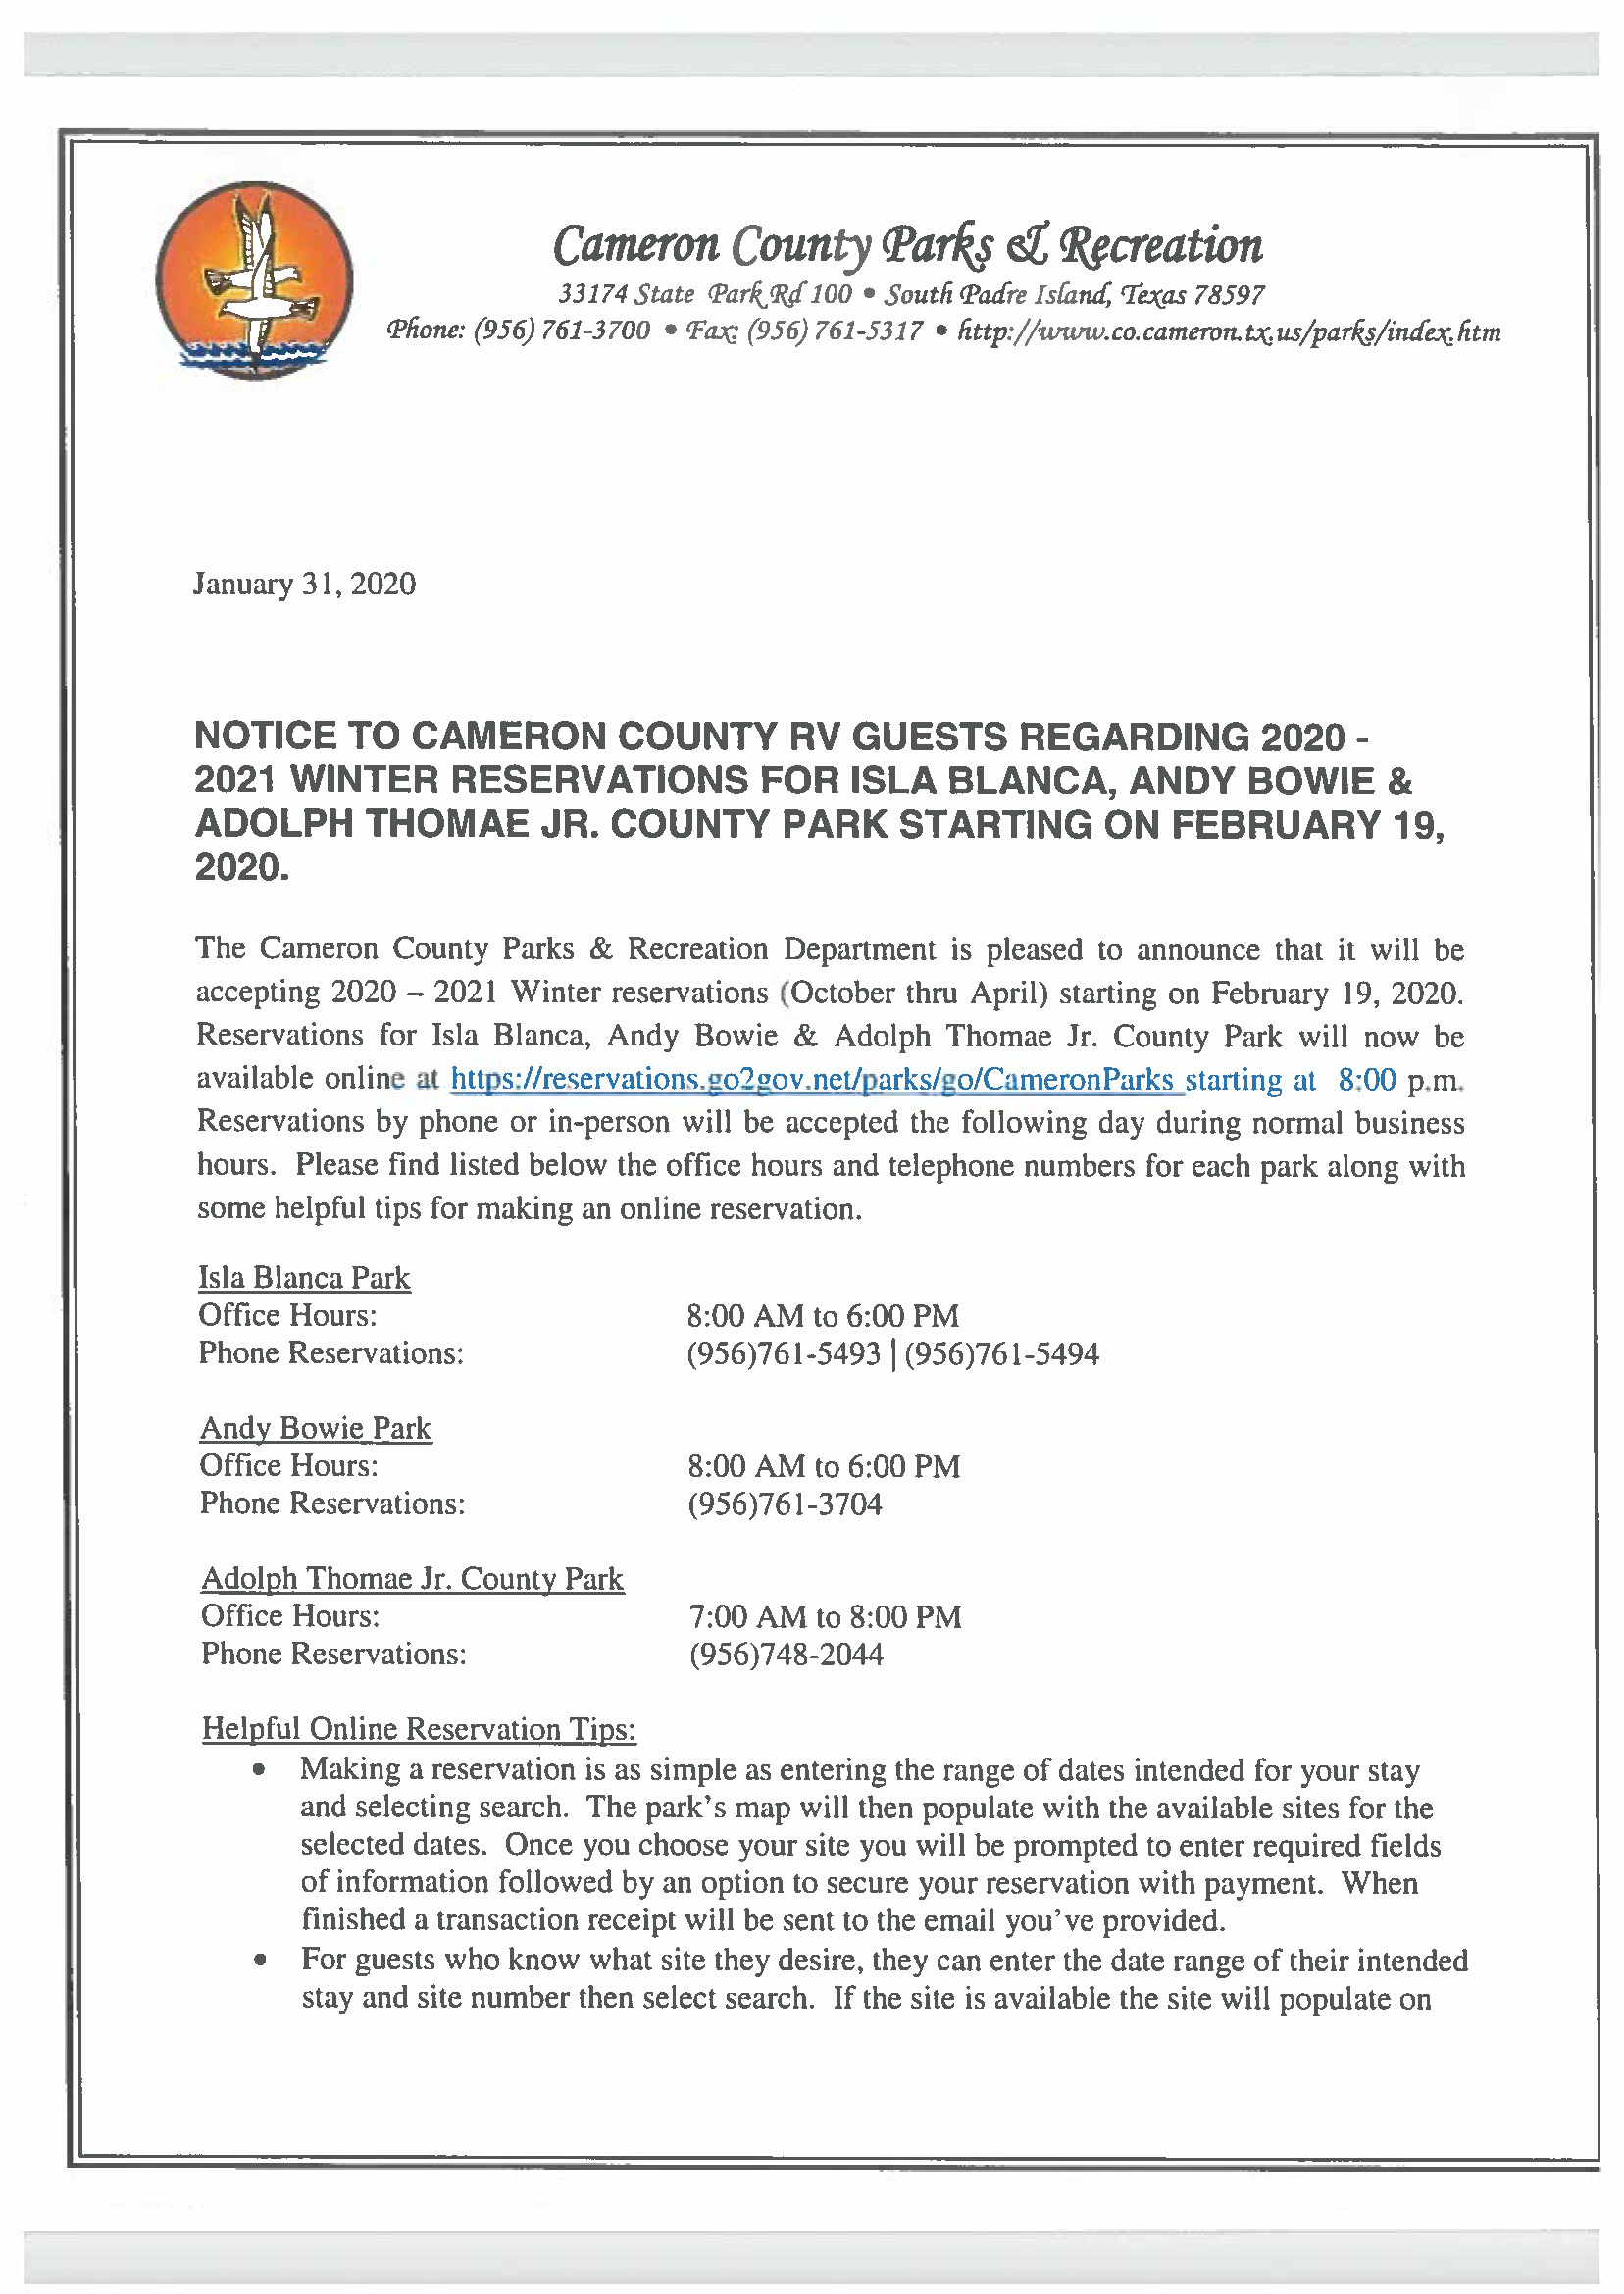 Notice To Cameron County Winter RV GUESTS Regarding Resevervations 2020 2021 1 31 20 Page 1